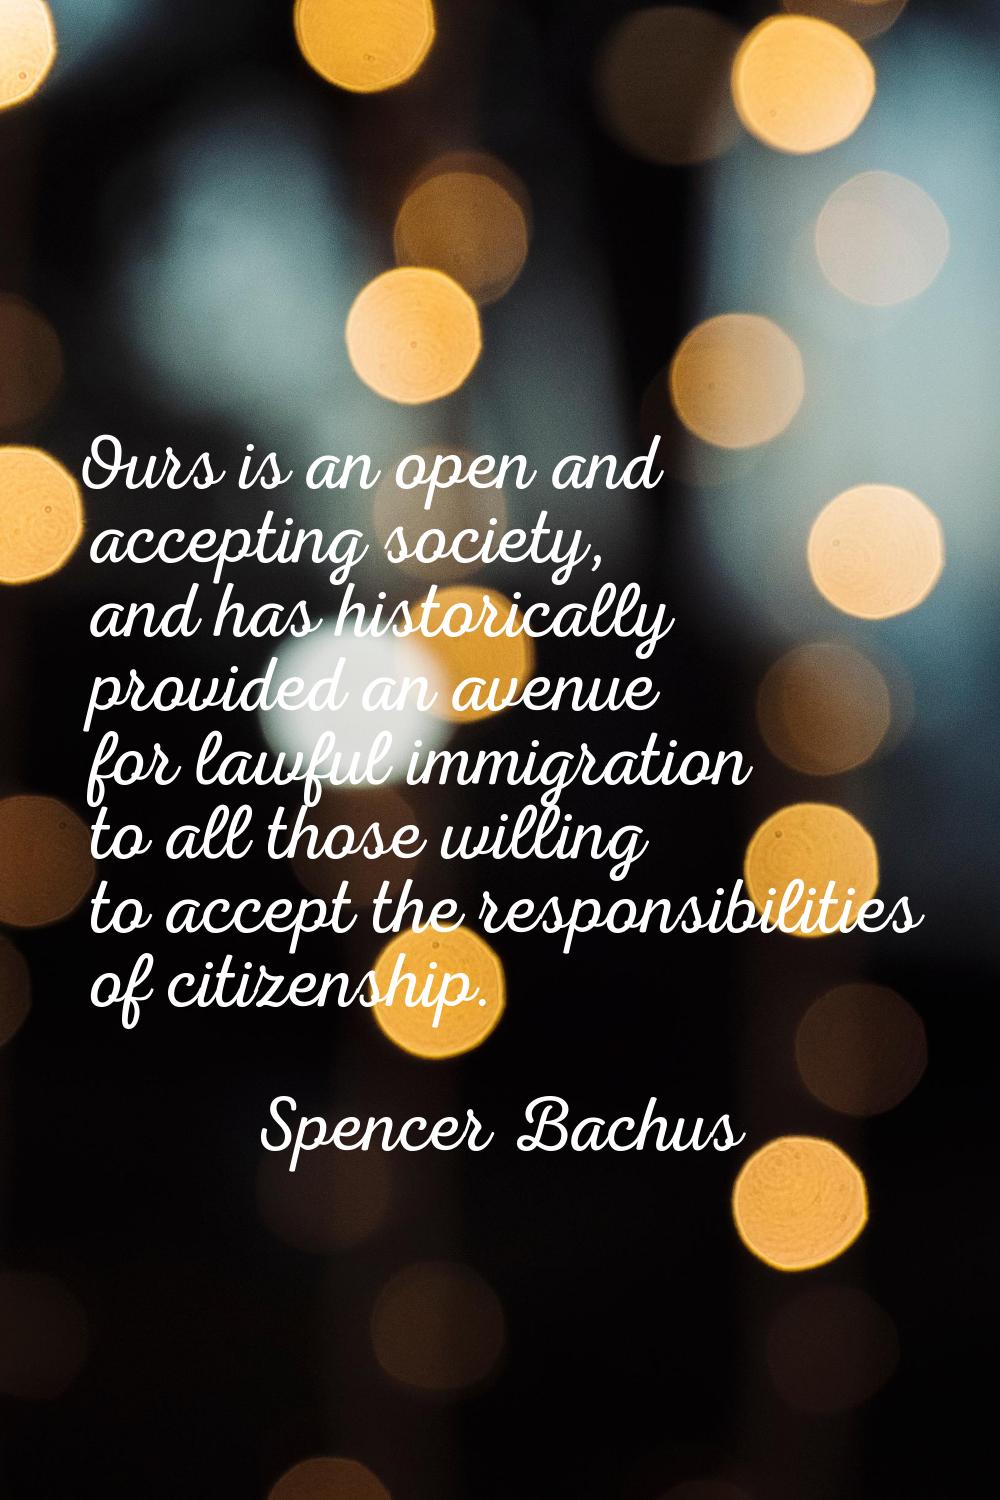 Ours is an open and accepting society, and has historically provided an avenue for lawful immigrati